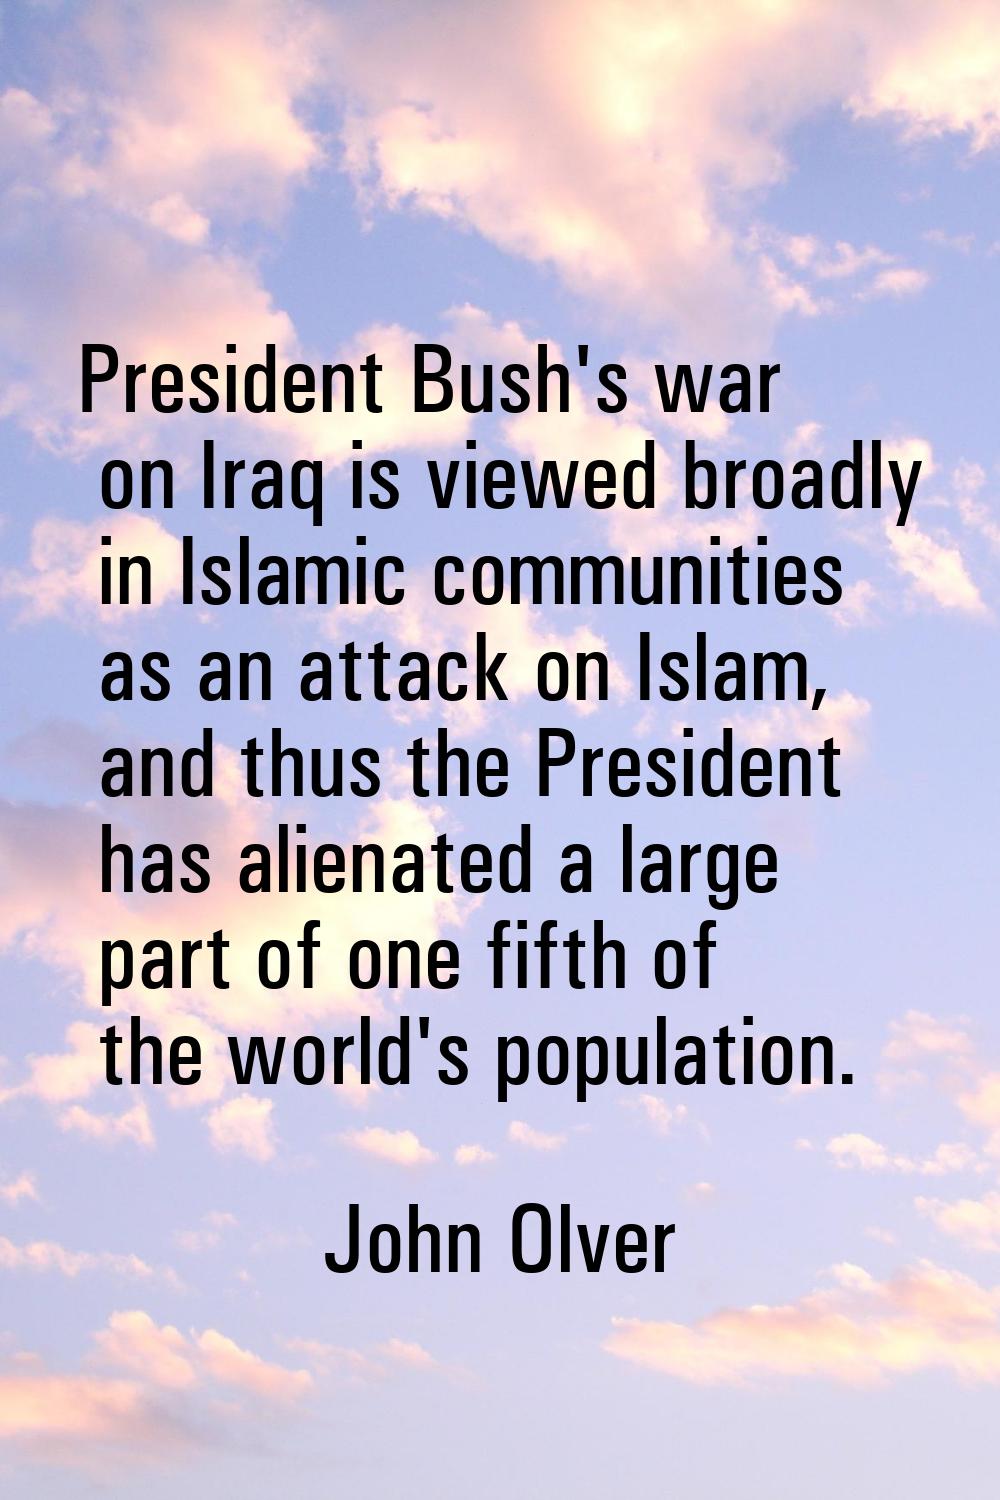 President Bush's war on Iraq is viewed broadly in Islamic communities as an attack on Islam, and th